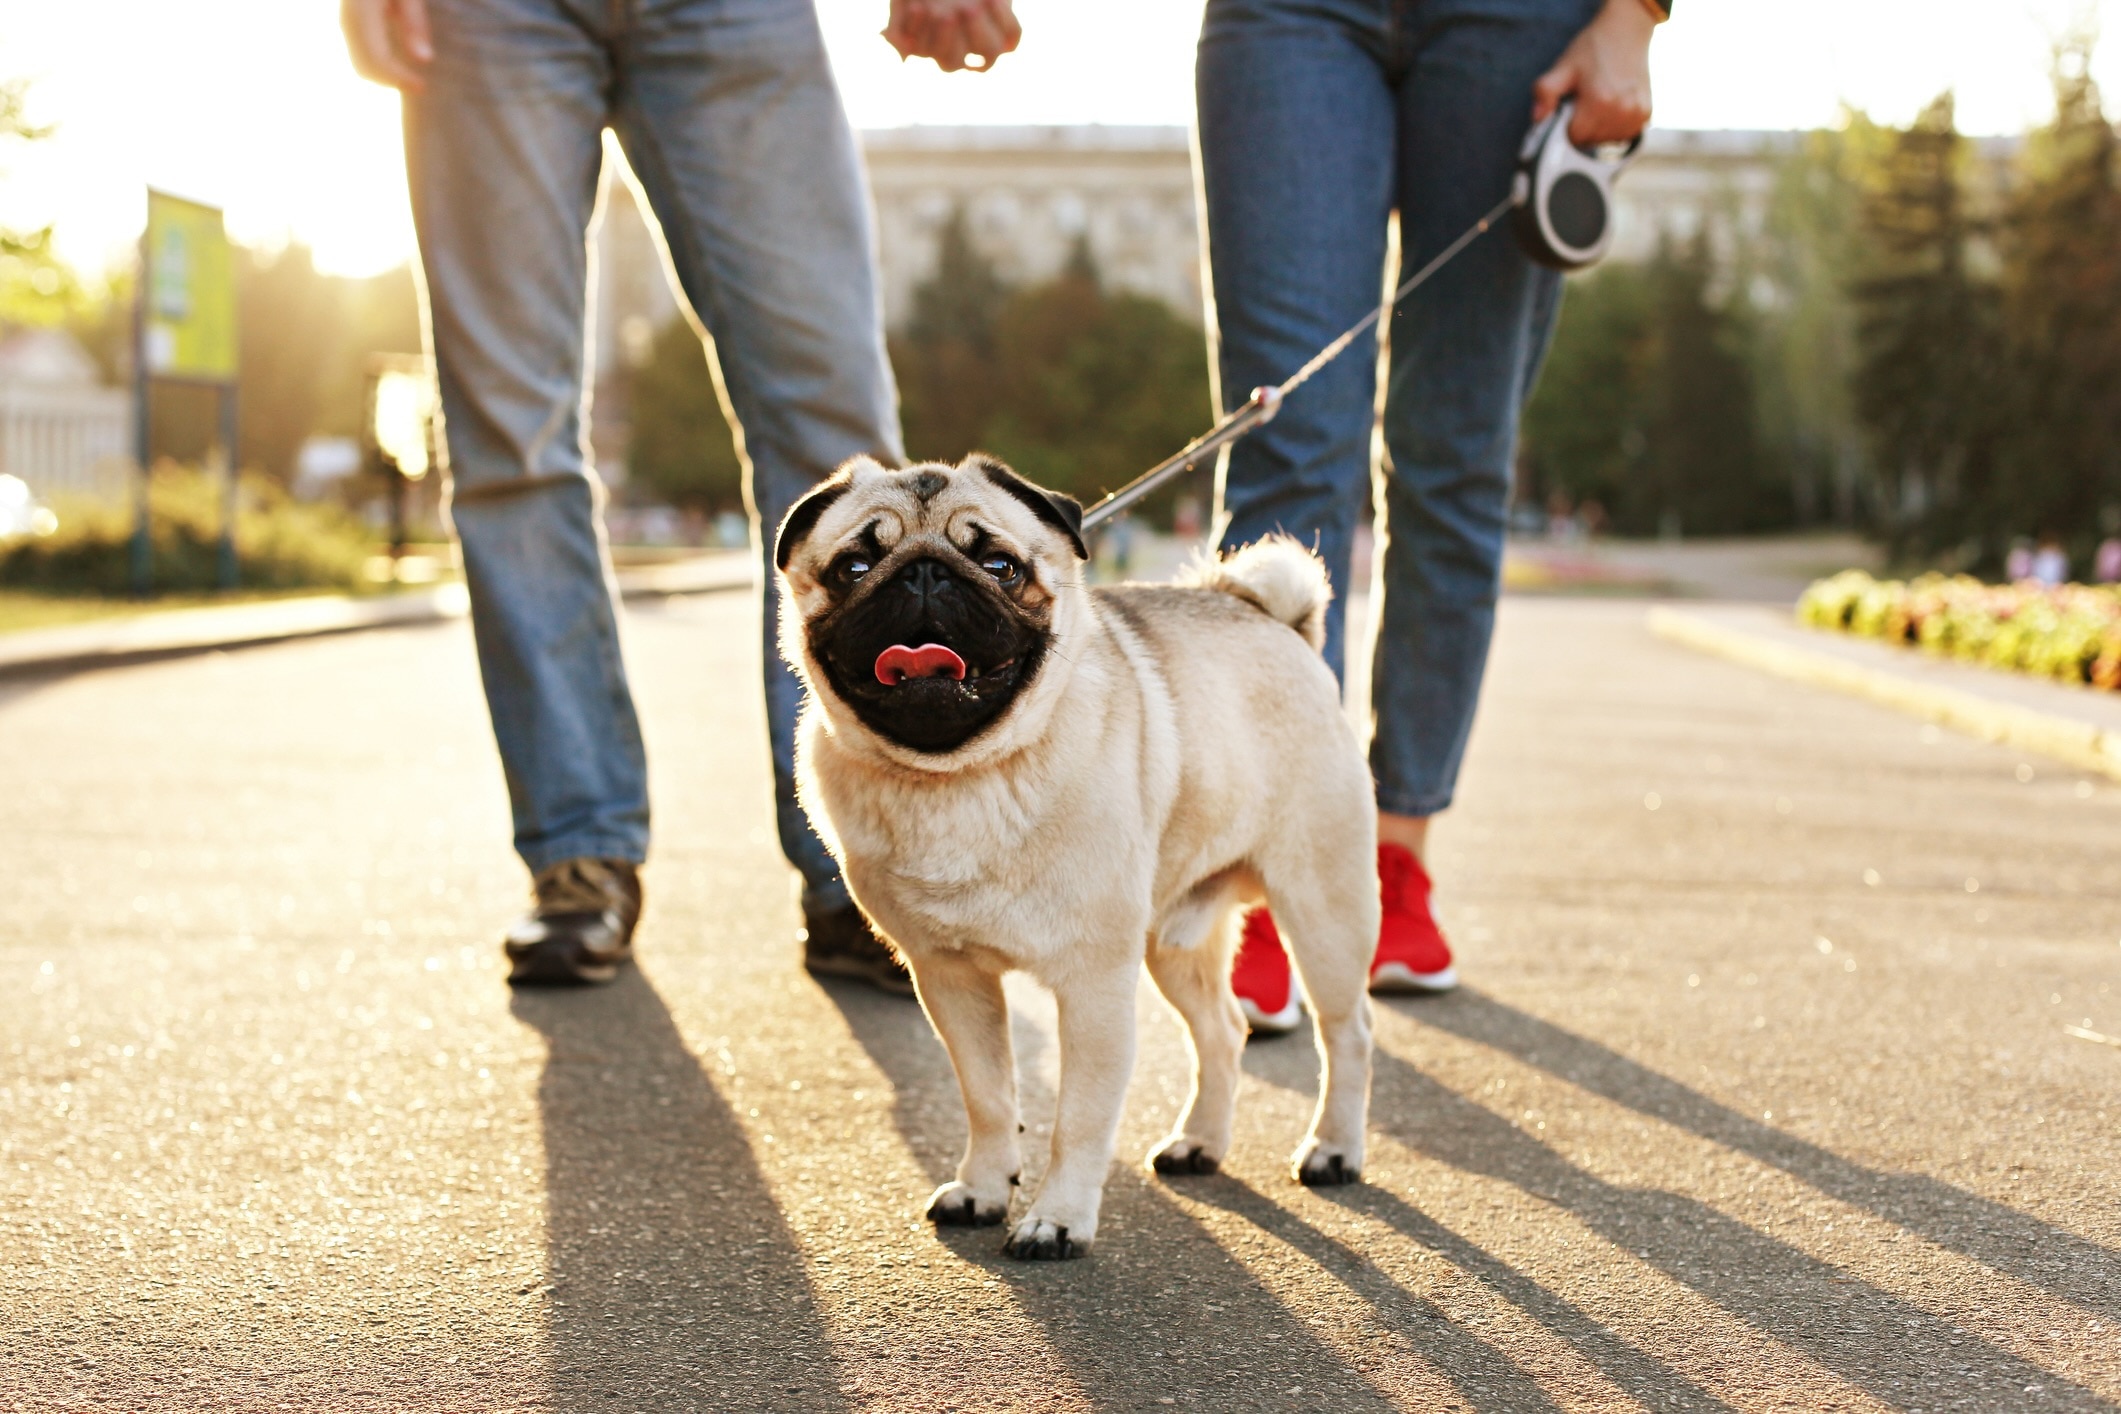 pug on a leash in front of two humans